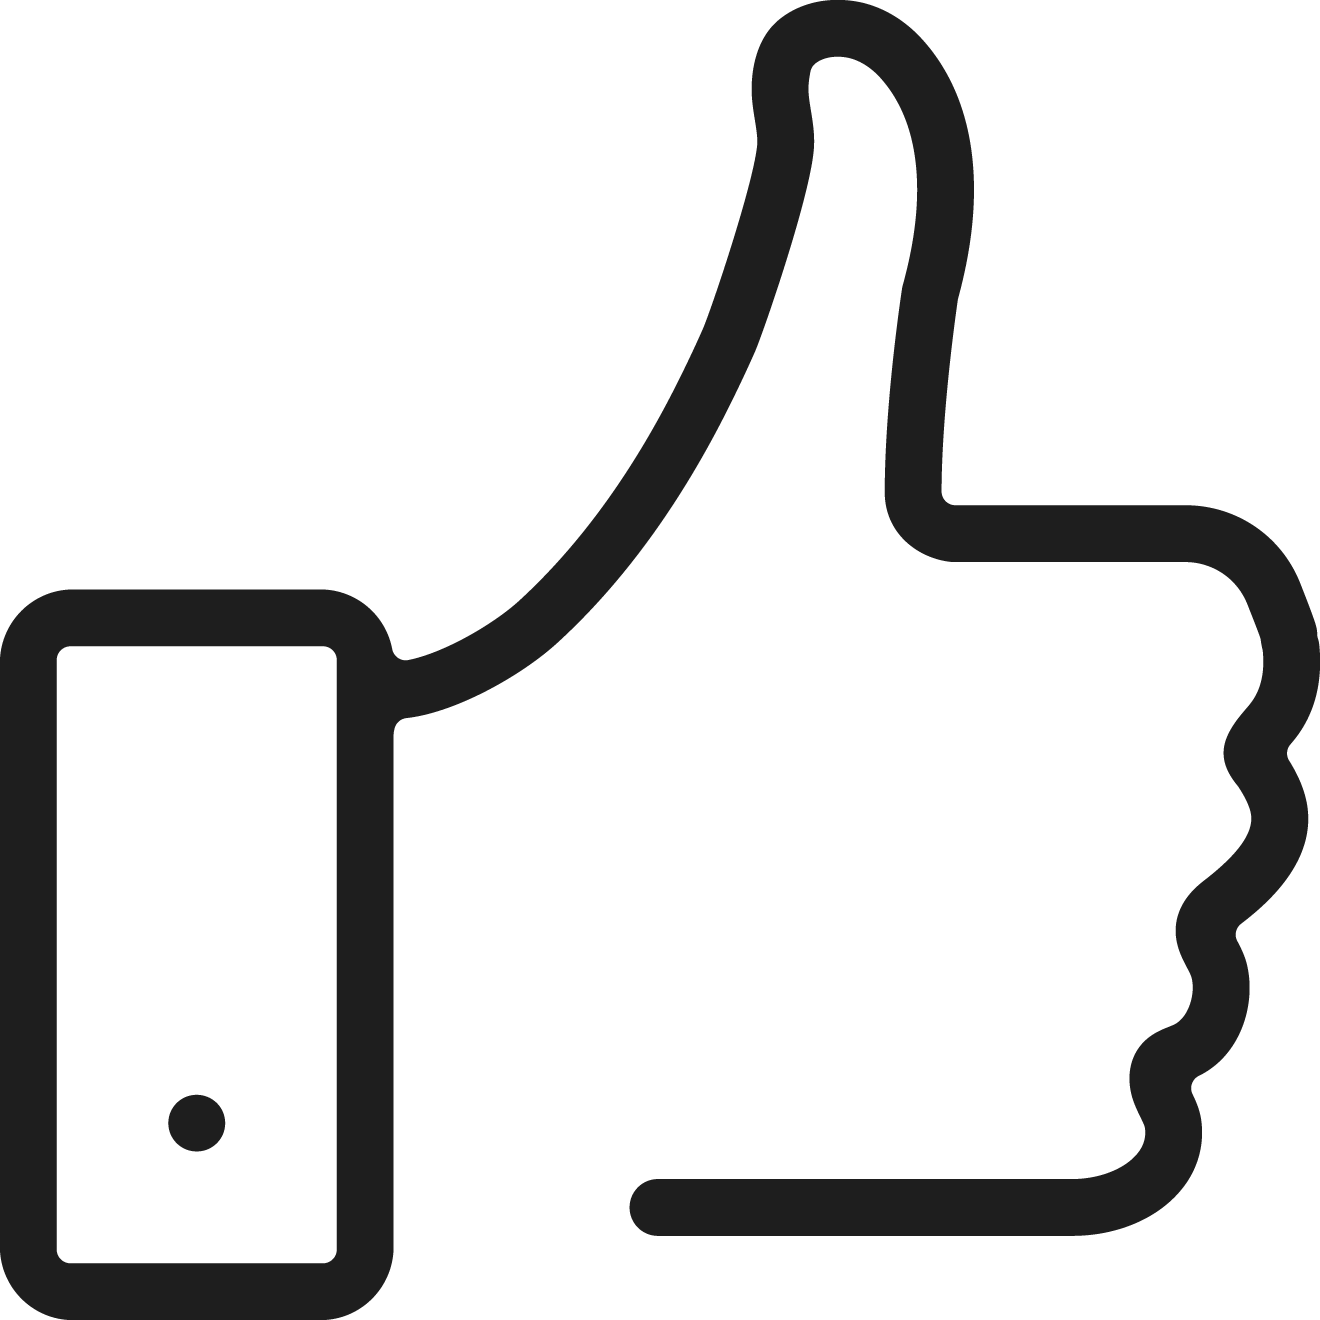 simplified-icon-thumbs-up